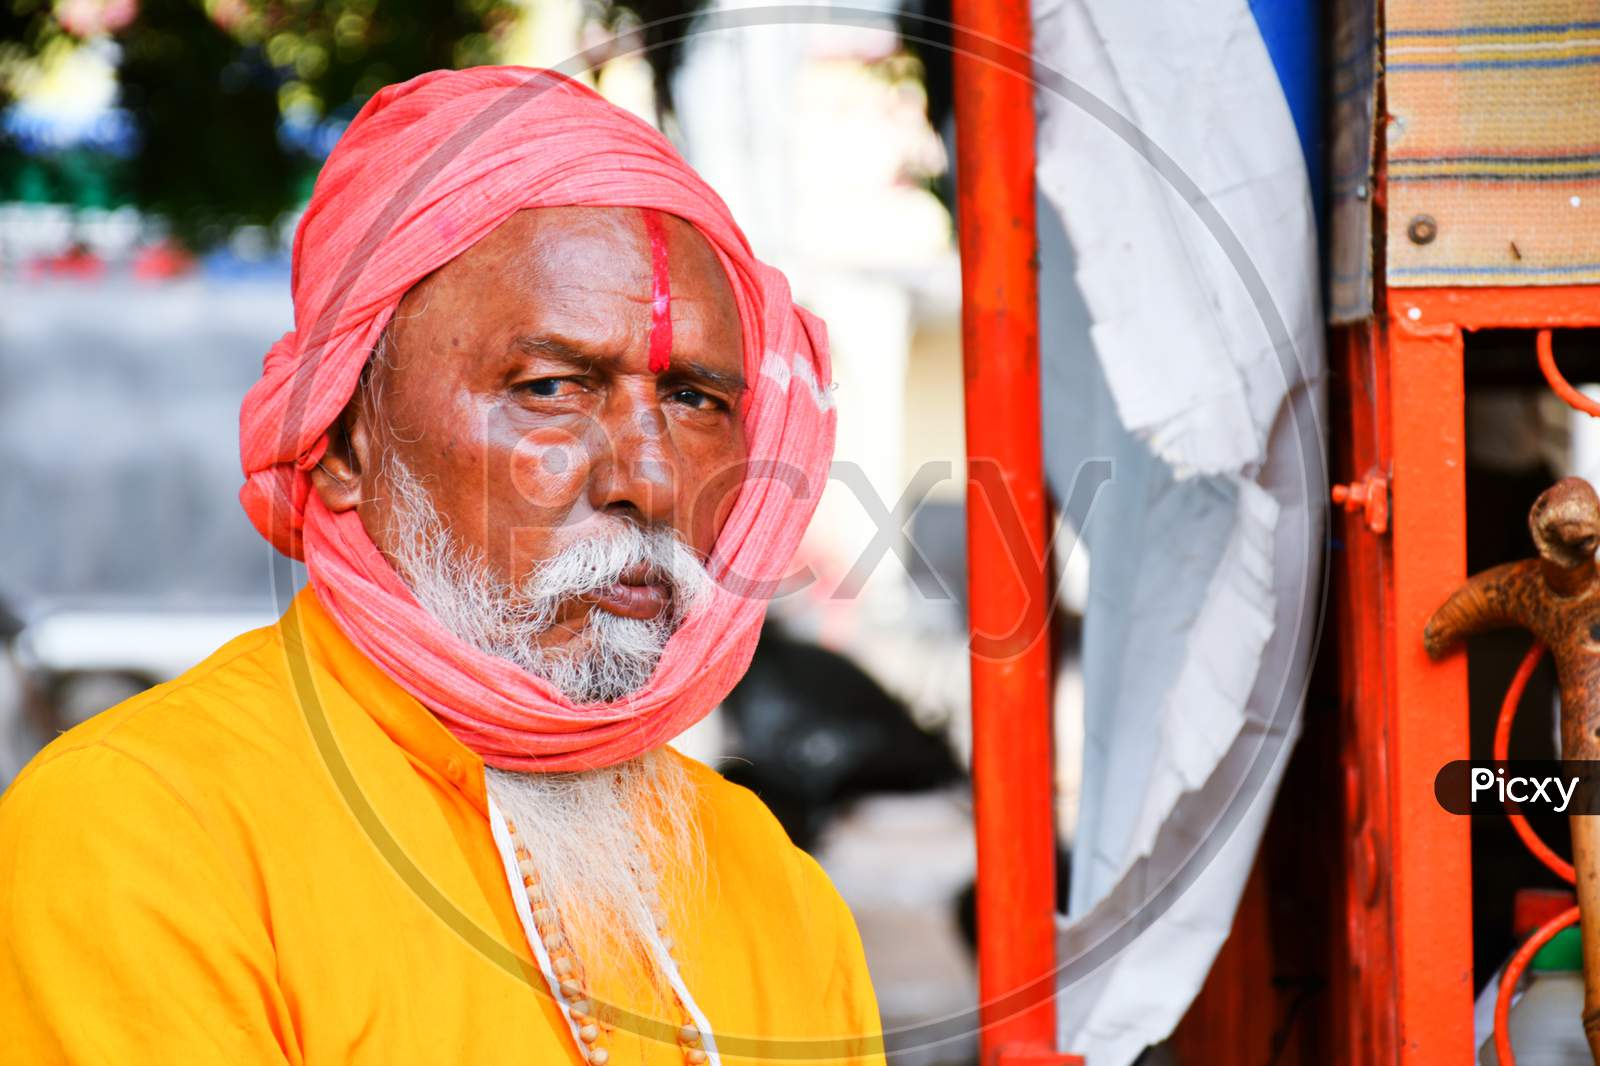 Indian Monk wear orange cloths and looking front